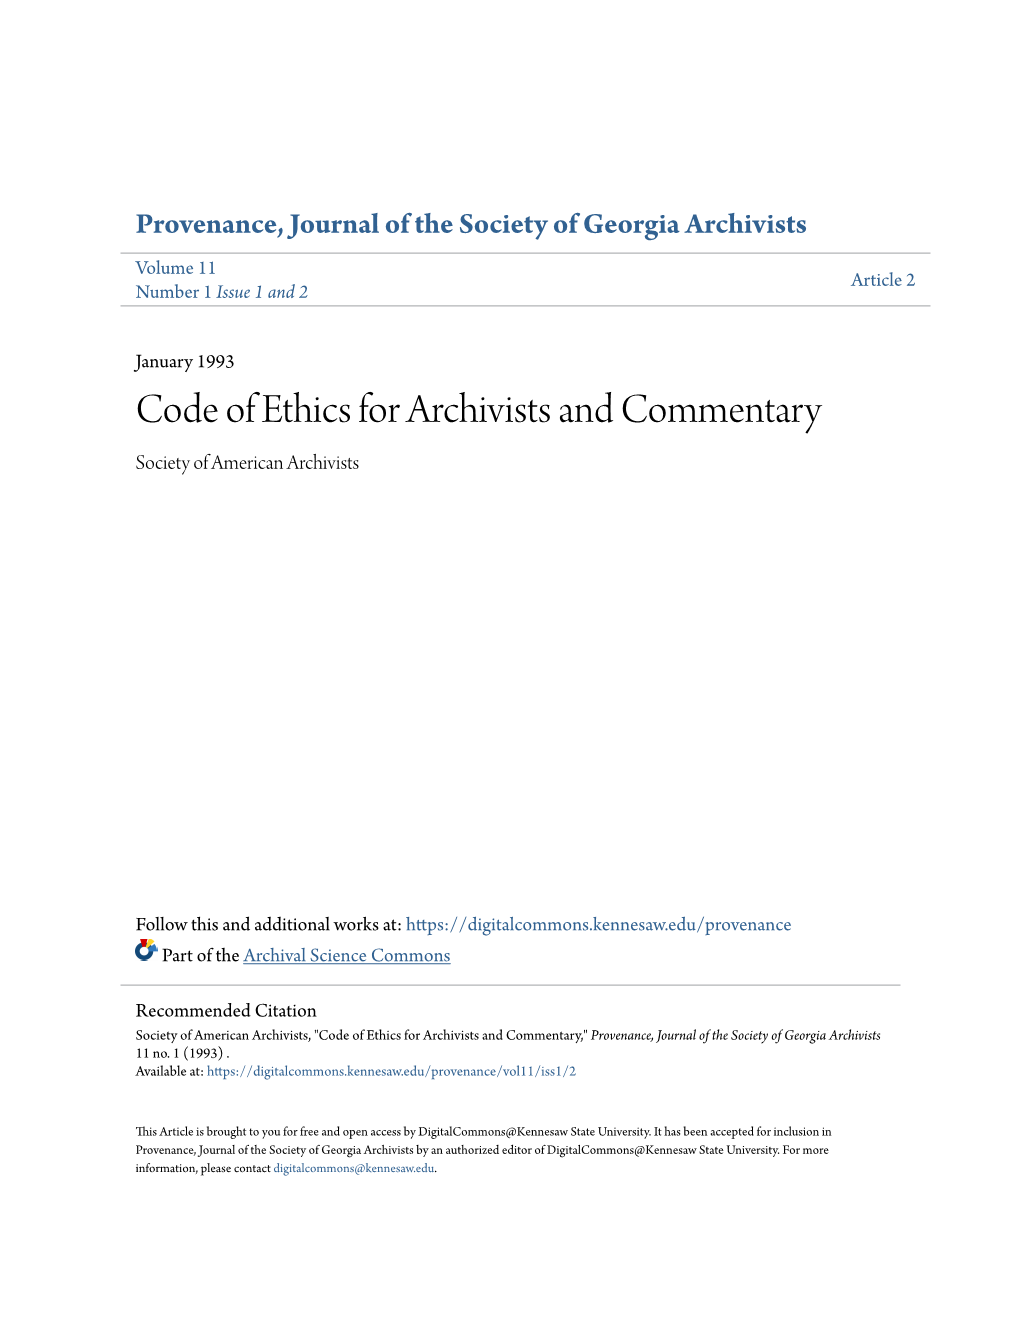 Code of Ethics for Archivists and Commentary Society of American Archivists